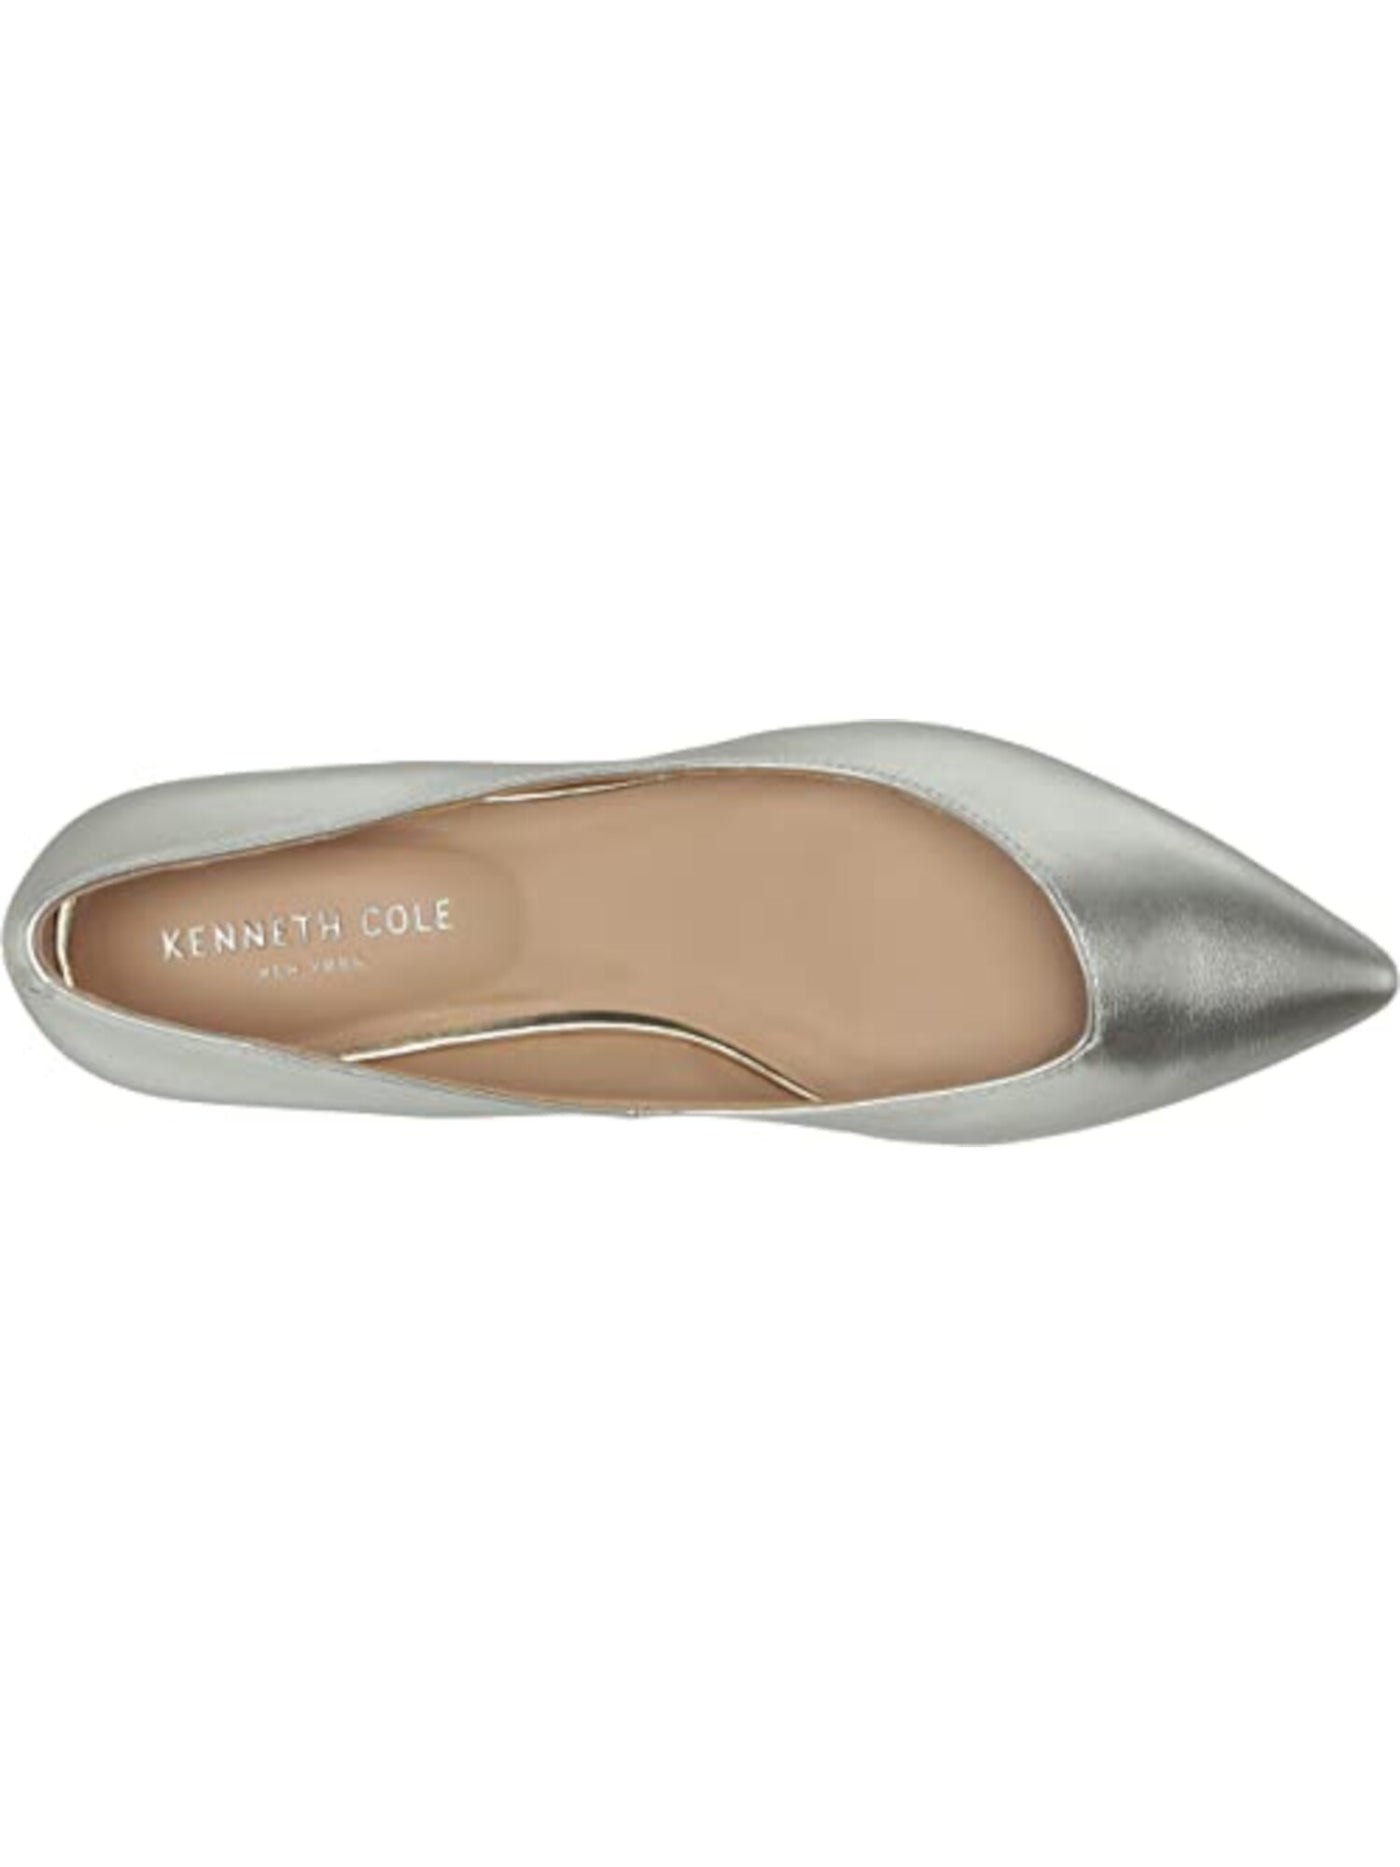 KENNETH COLE NEW YORK Womens Silver Cushioned Camelia Pointed Toe Block Heel Slip On Leather Dress Flats Shoes